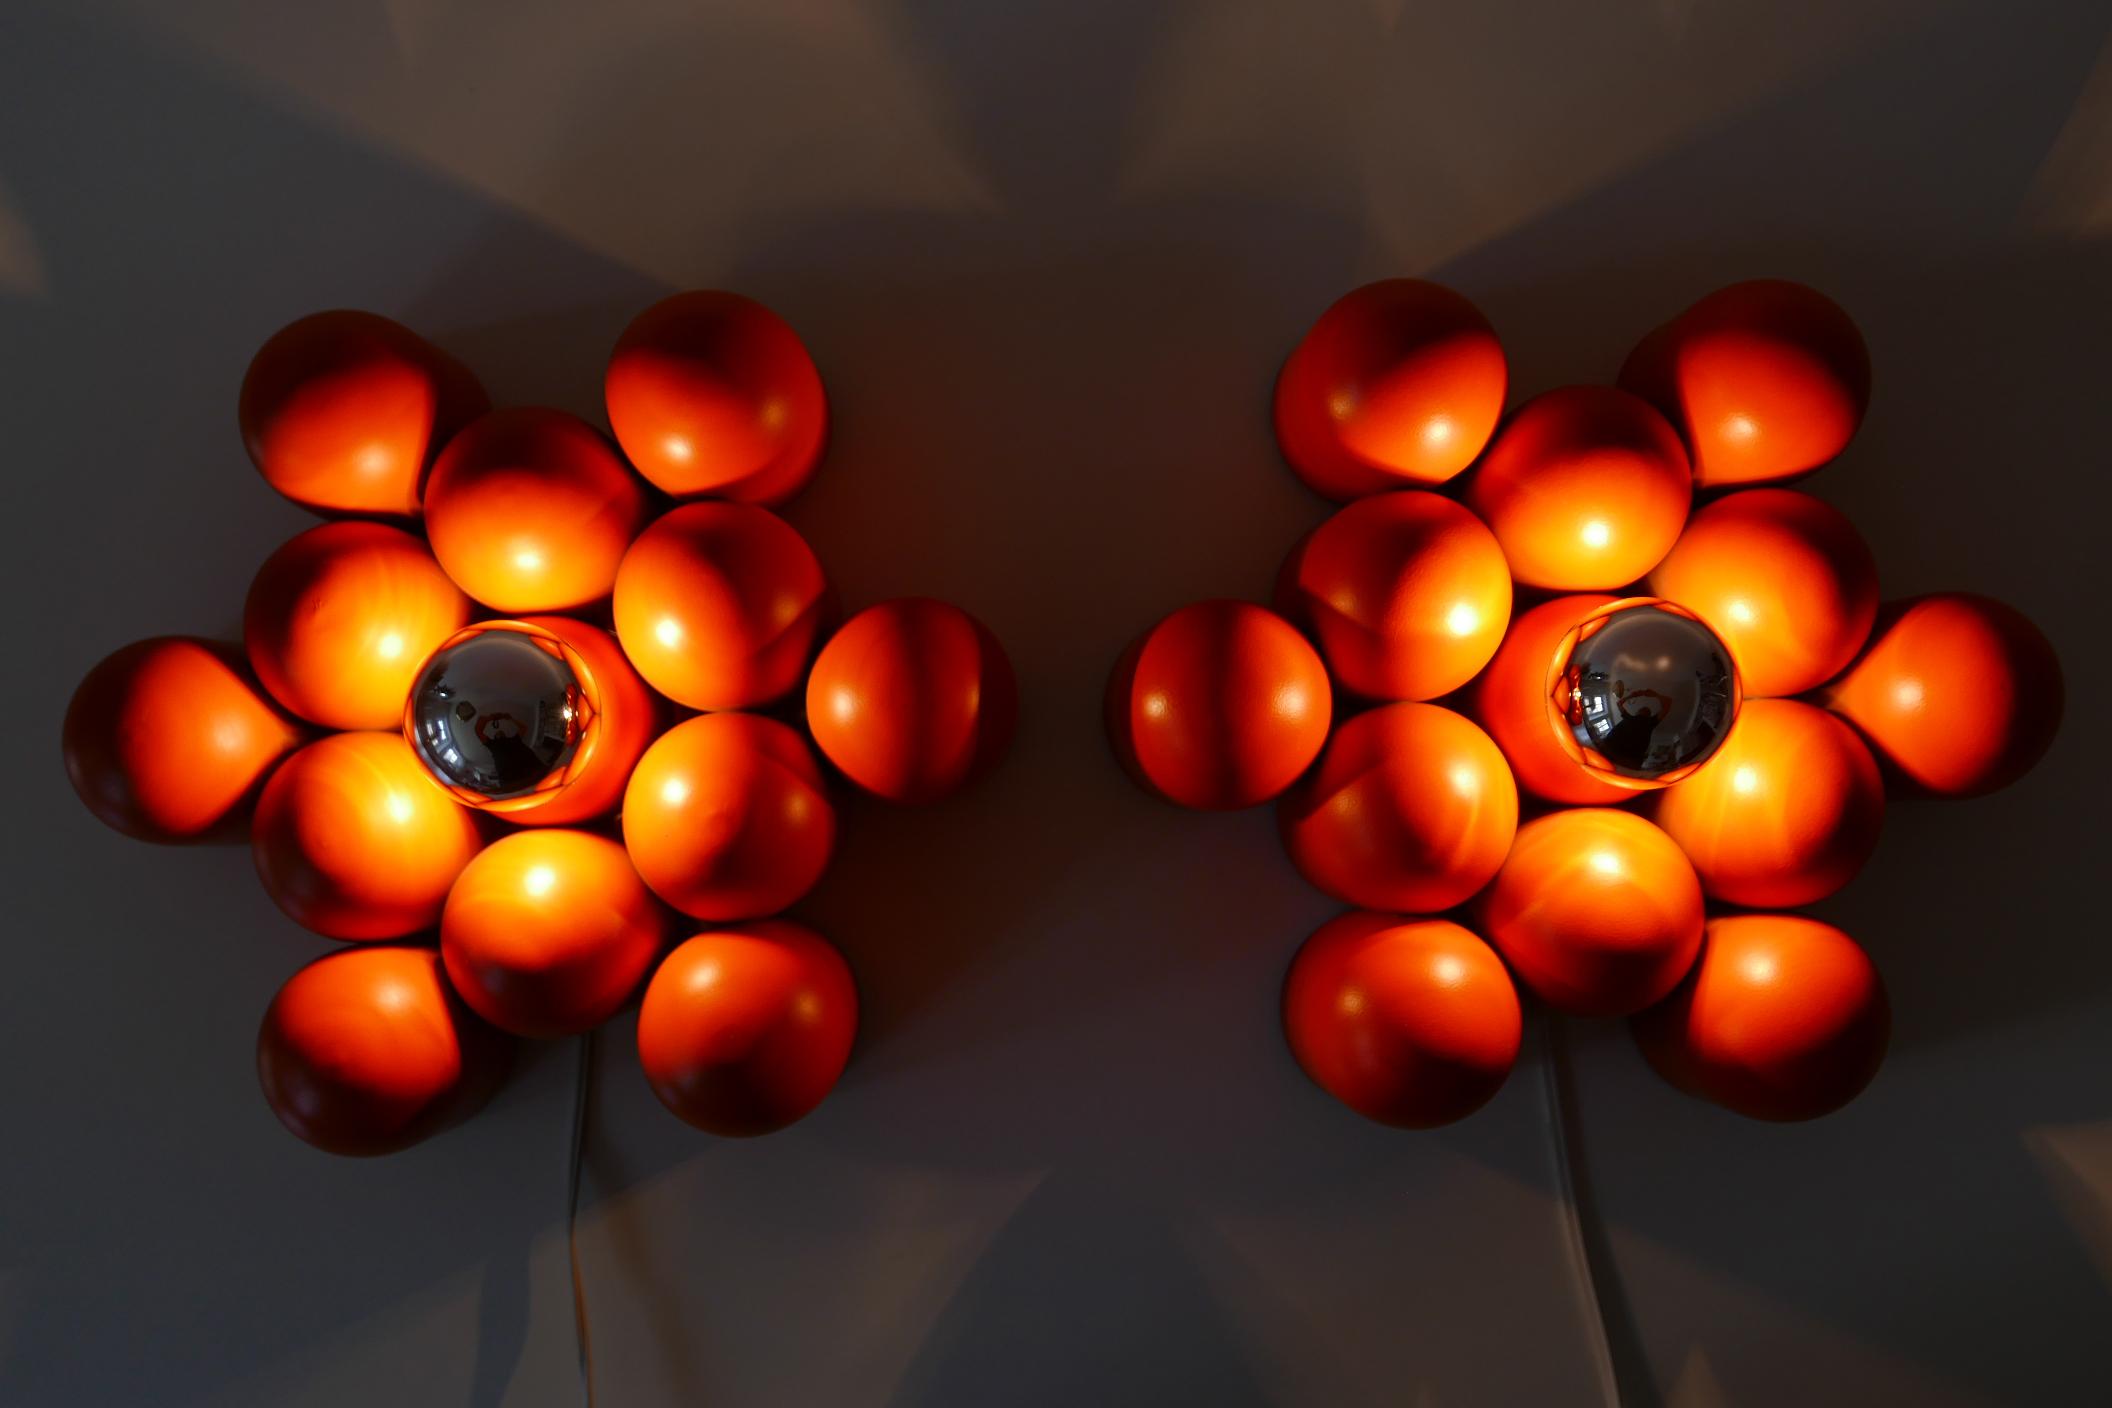 Set of two extremely rare Mid-Century Modern Sputnik wall lamps or sconces or ceiling fixtures. Designed and manufactured probably in Germany, 1960s.

The lamps are executed in orange enameled aluminum and each lamp needs 1 x E27 Edison screw fit